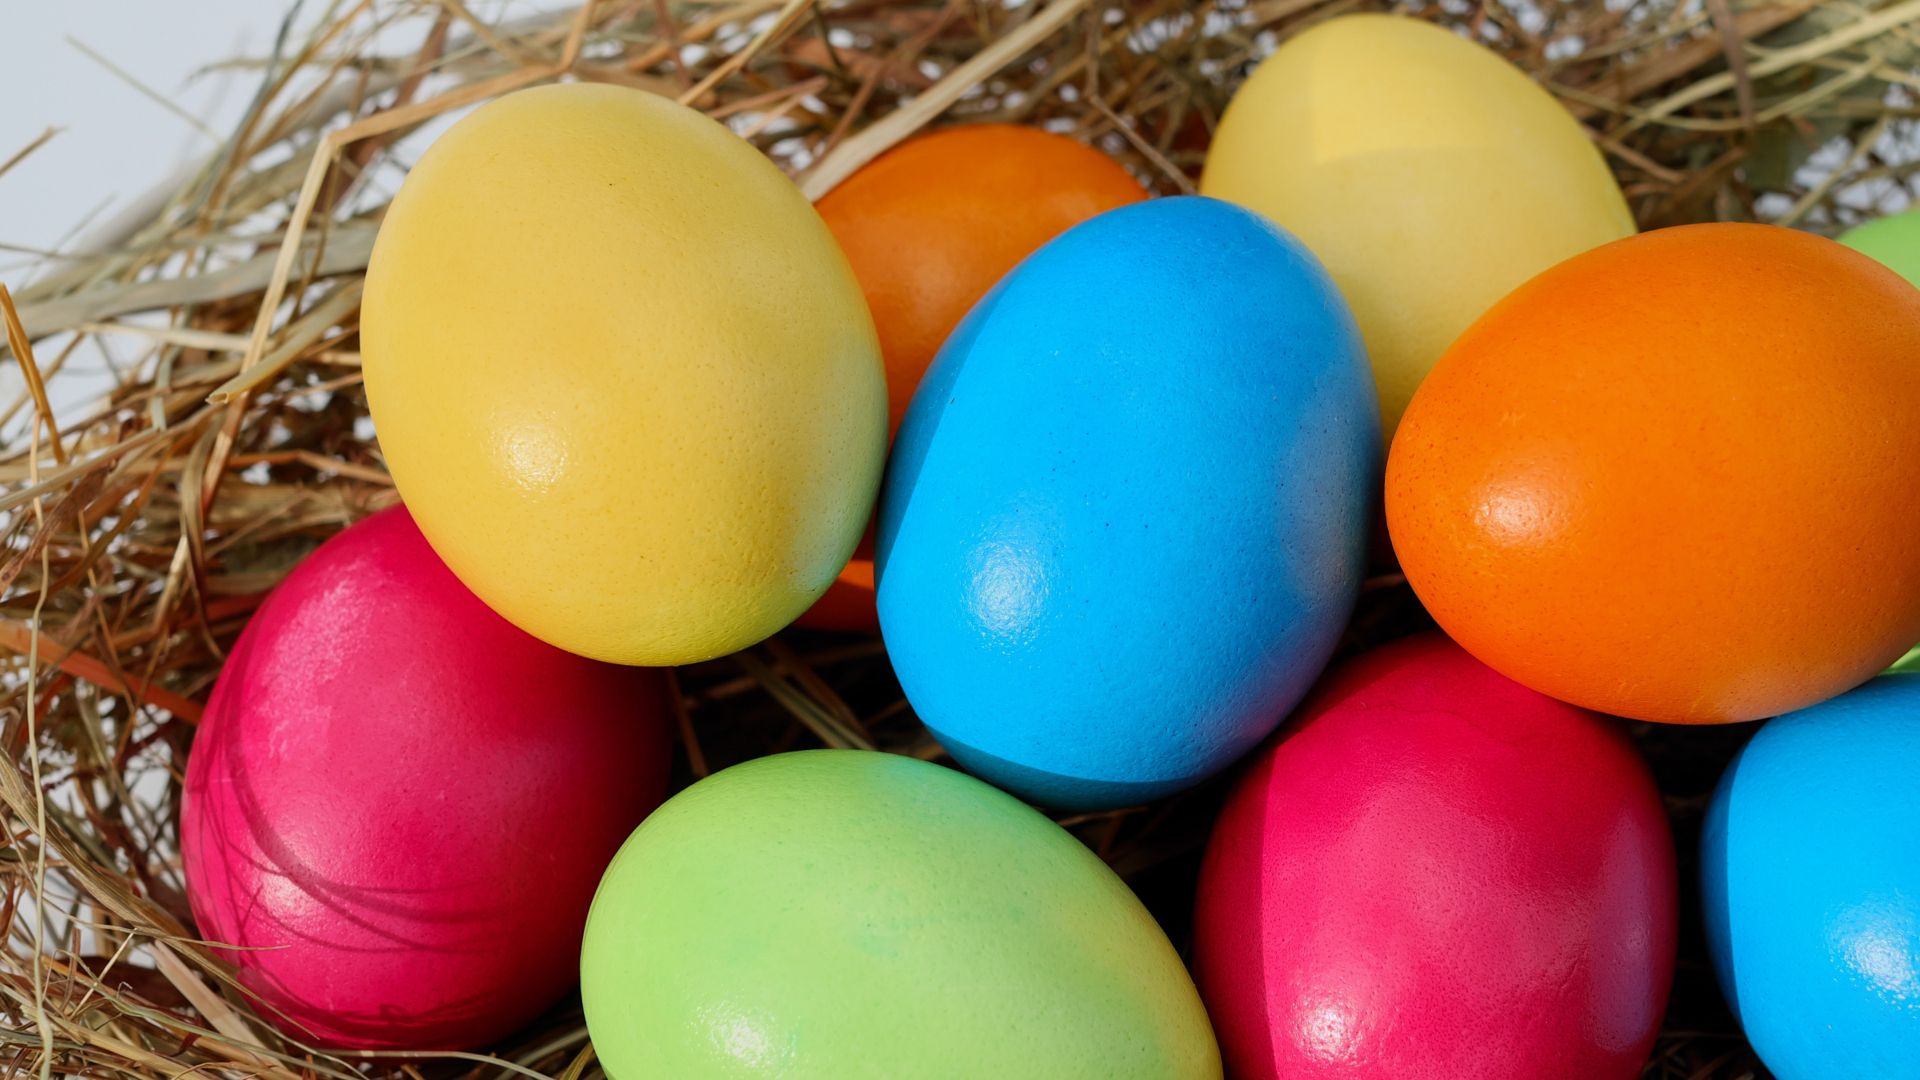 Download 1920x1080 wallpaper easter eggs, colorful, close up, nest, full hd, hdtv, fhd, 1080p, 1920x1080 HD image, background, 2657